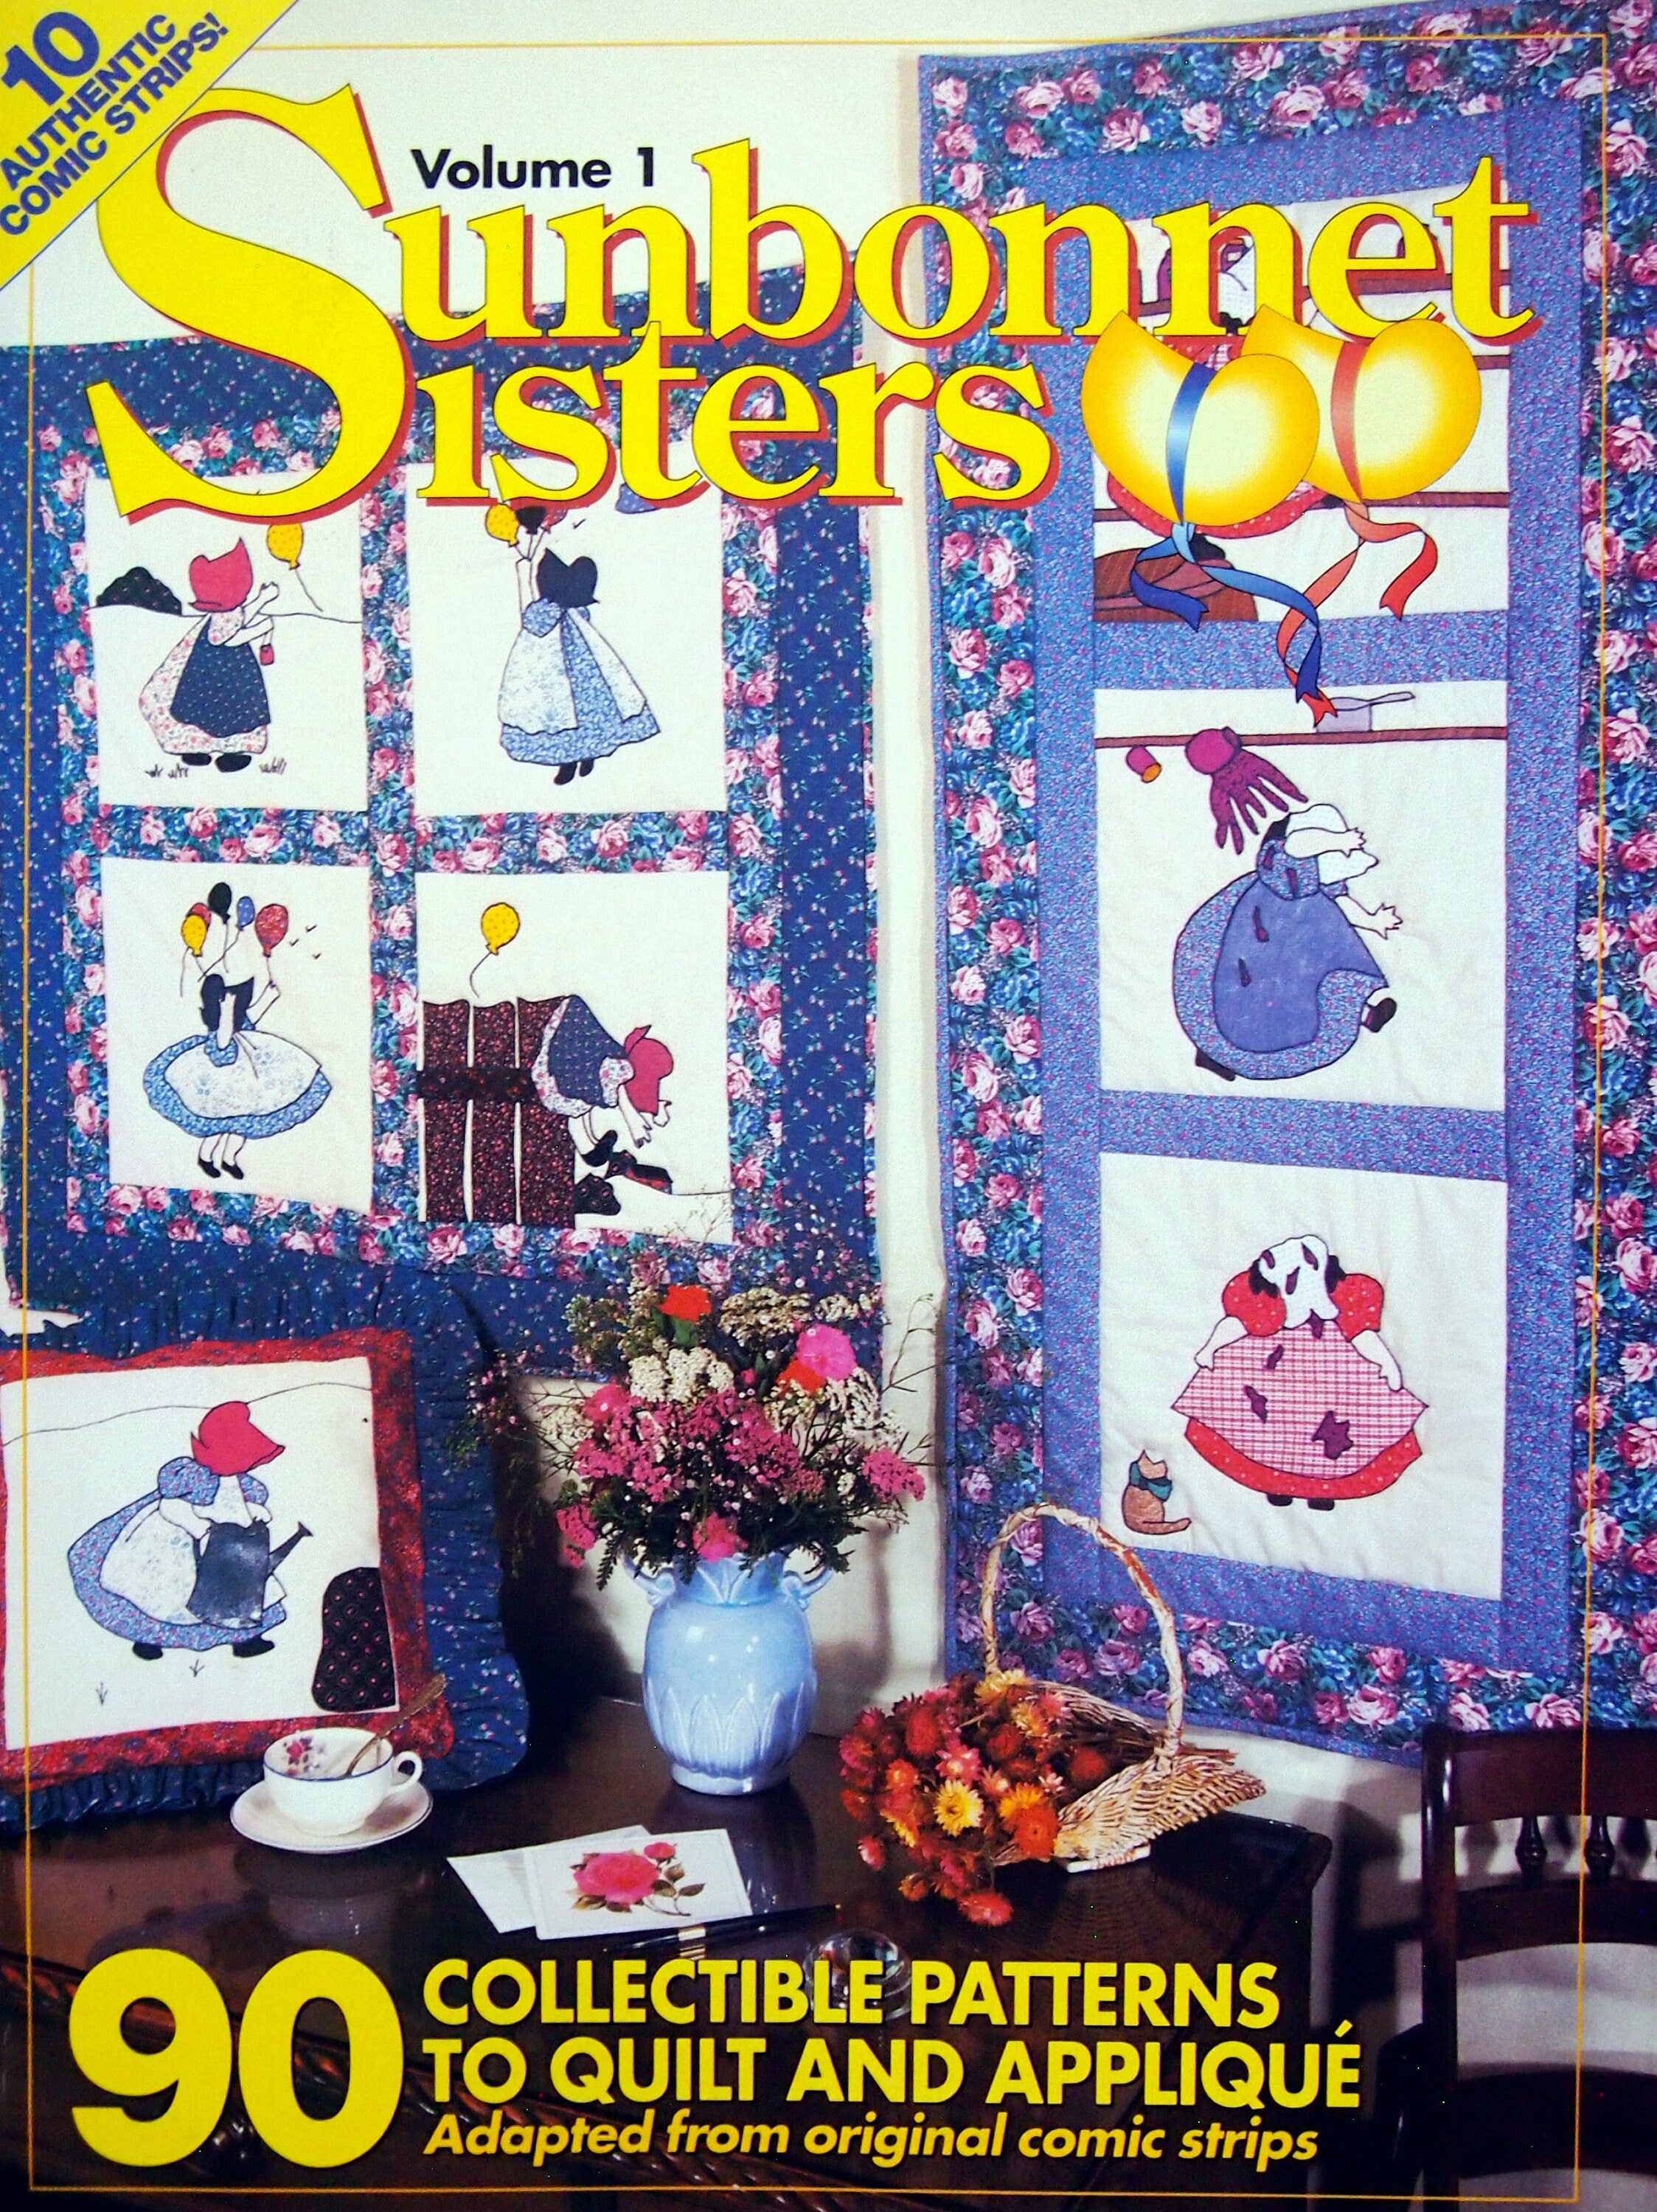 Sunbonnet Sisters Volume 1 90 Collectible Patterns to Quilt and Applique  Vintage Paperback Applique Quilting Pattern Book 1992 -  Hong Kong